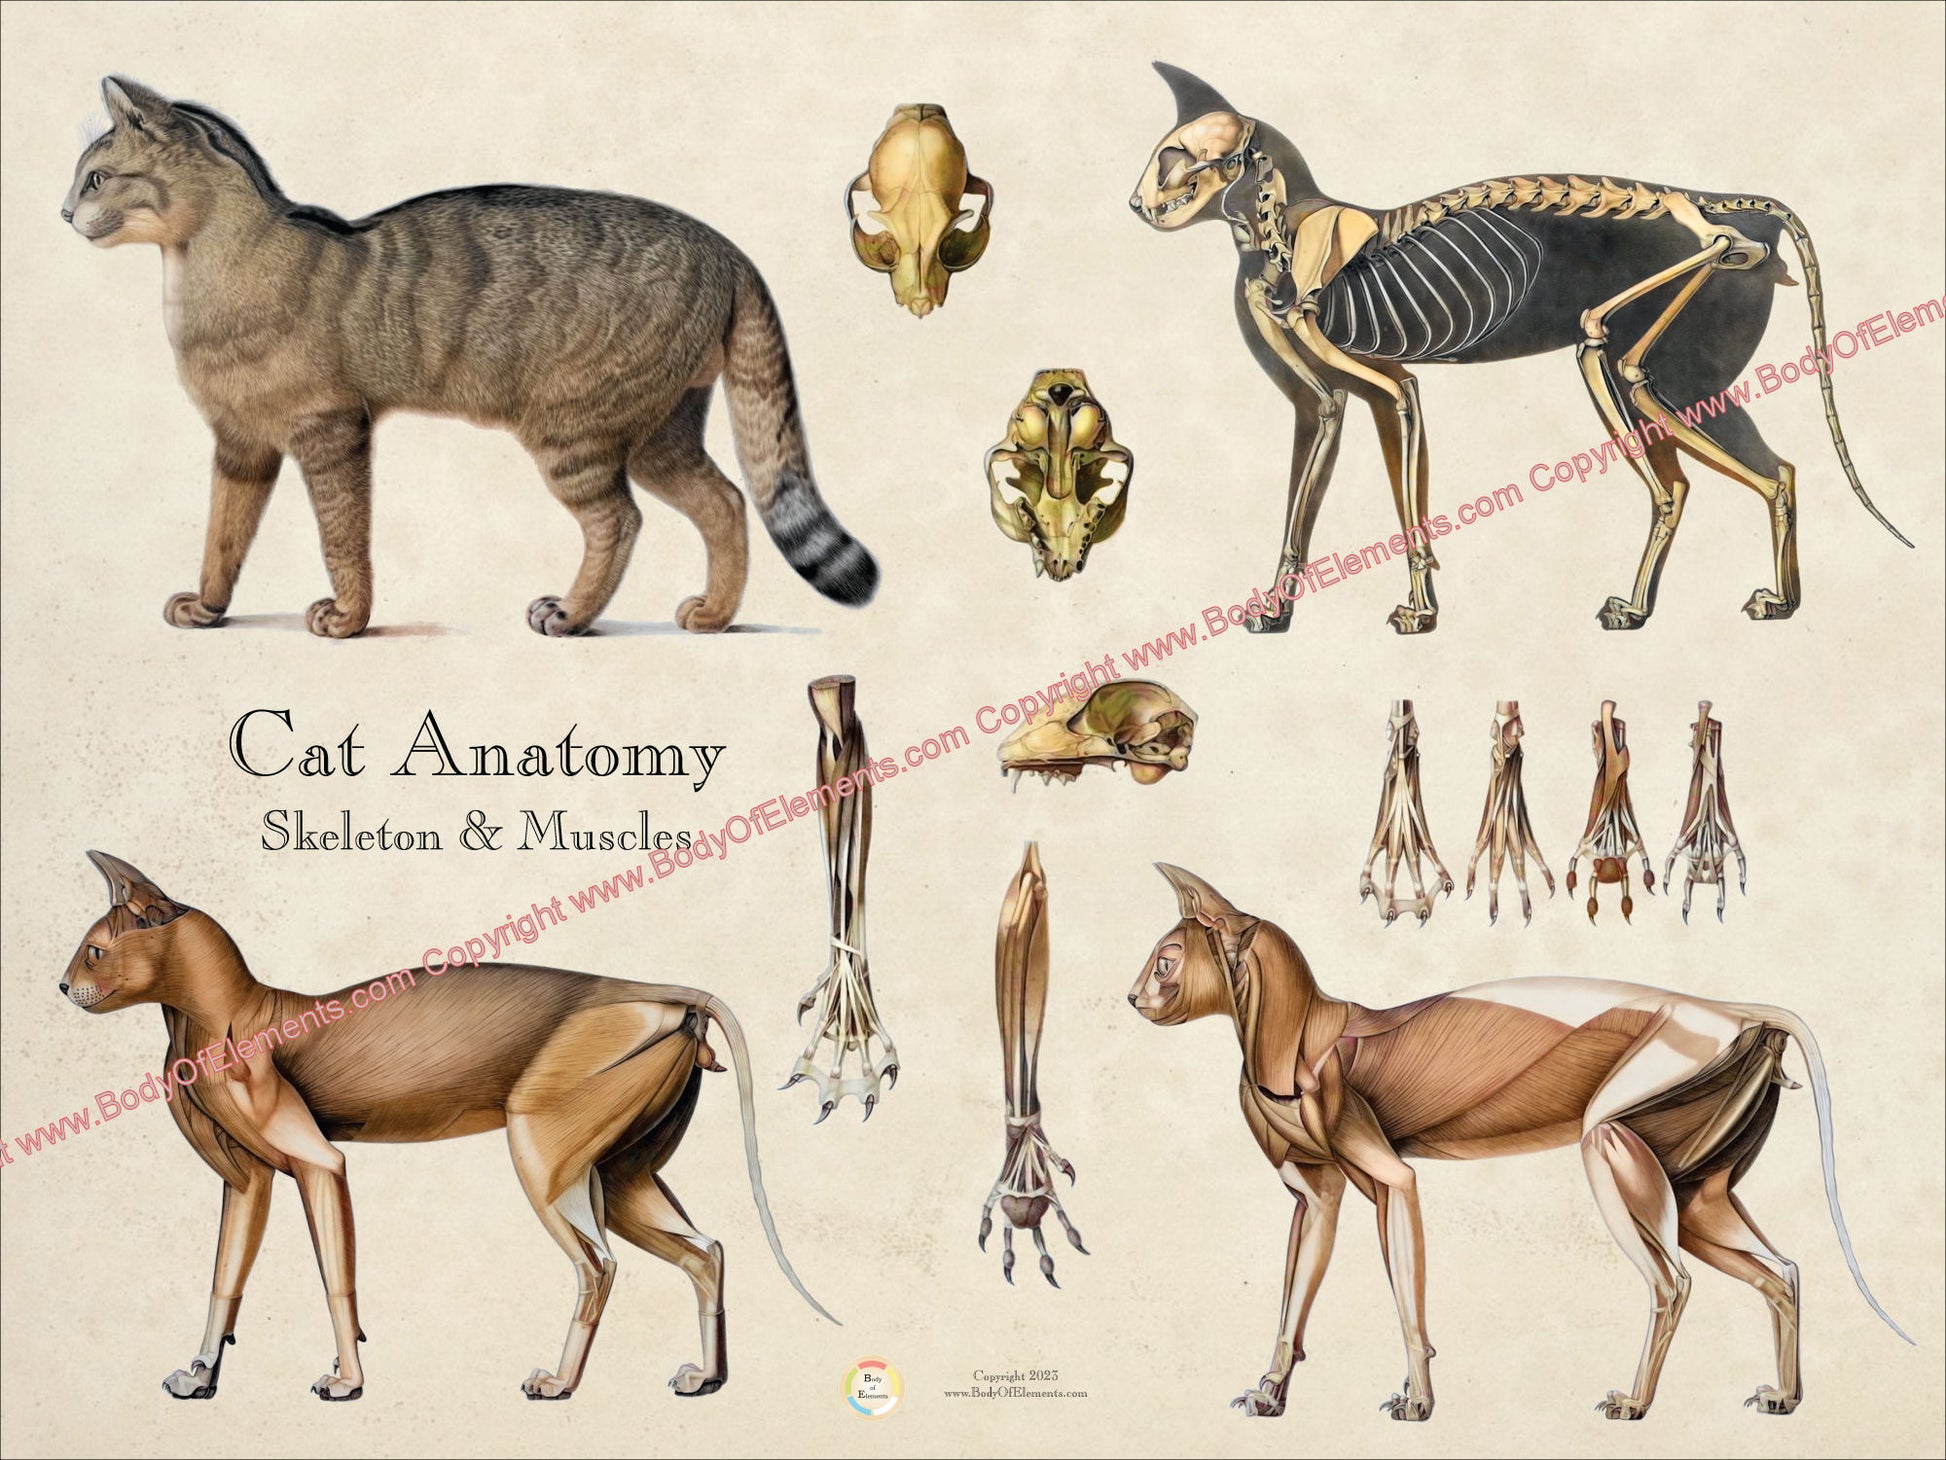 Cat skeletal and muscular anatomy poster